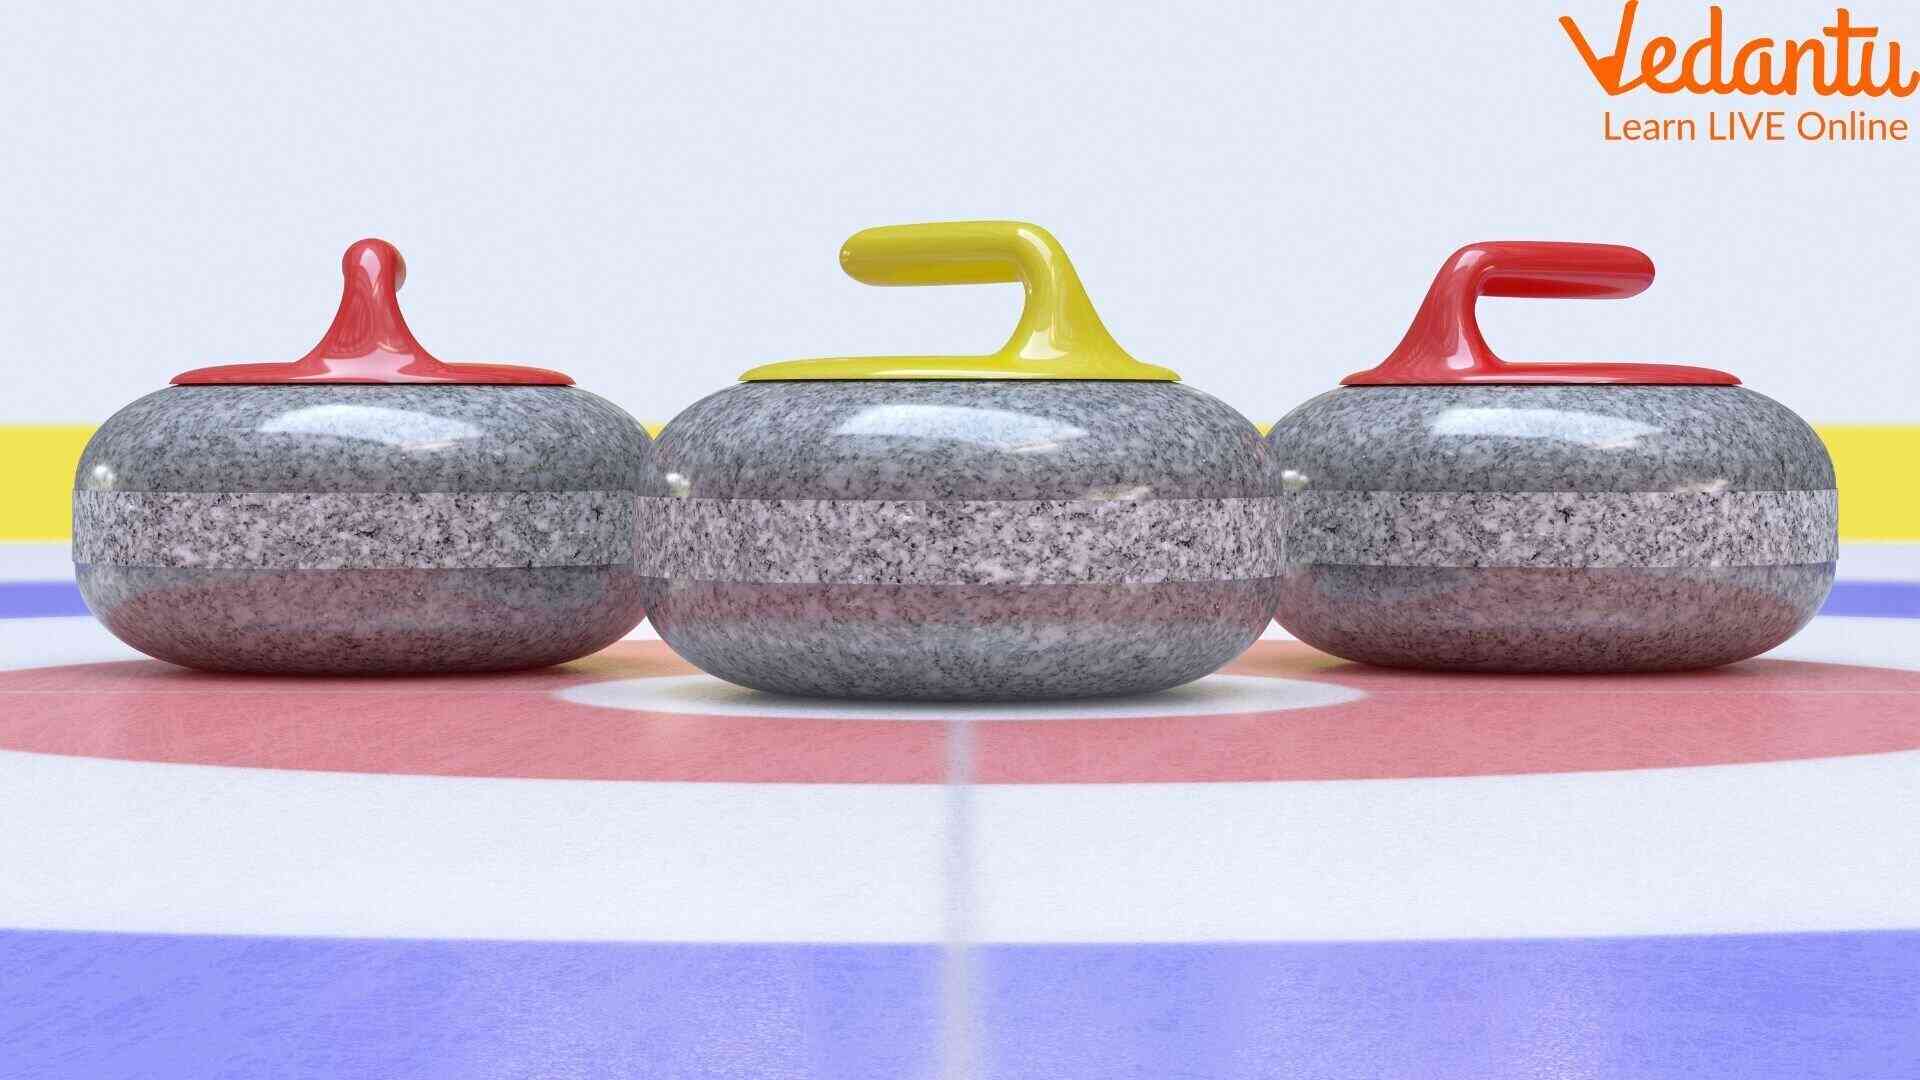 Curling, an unusual Olympic sport